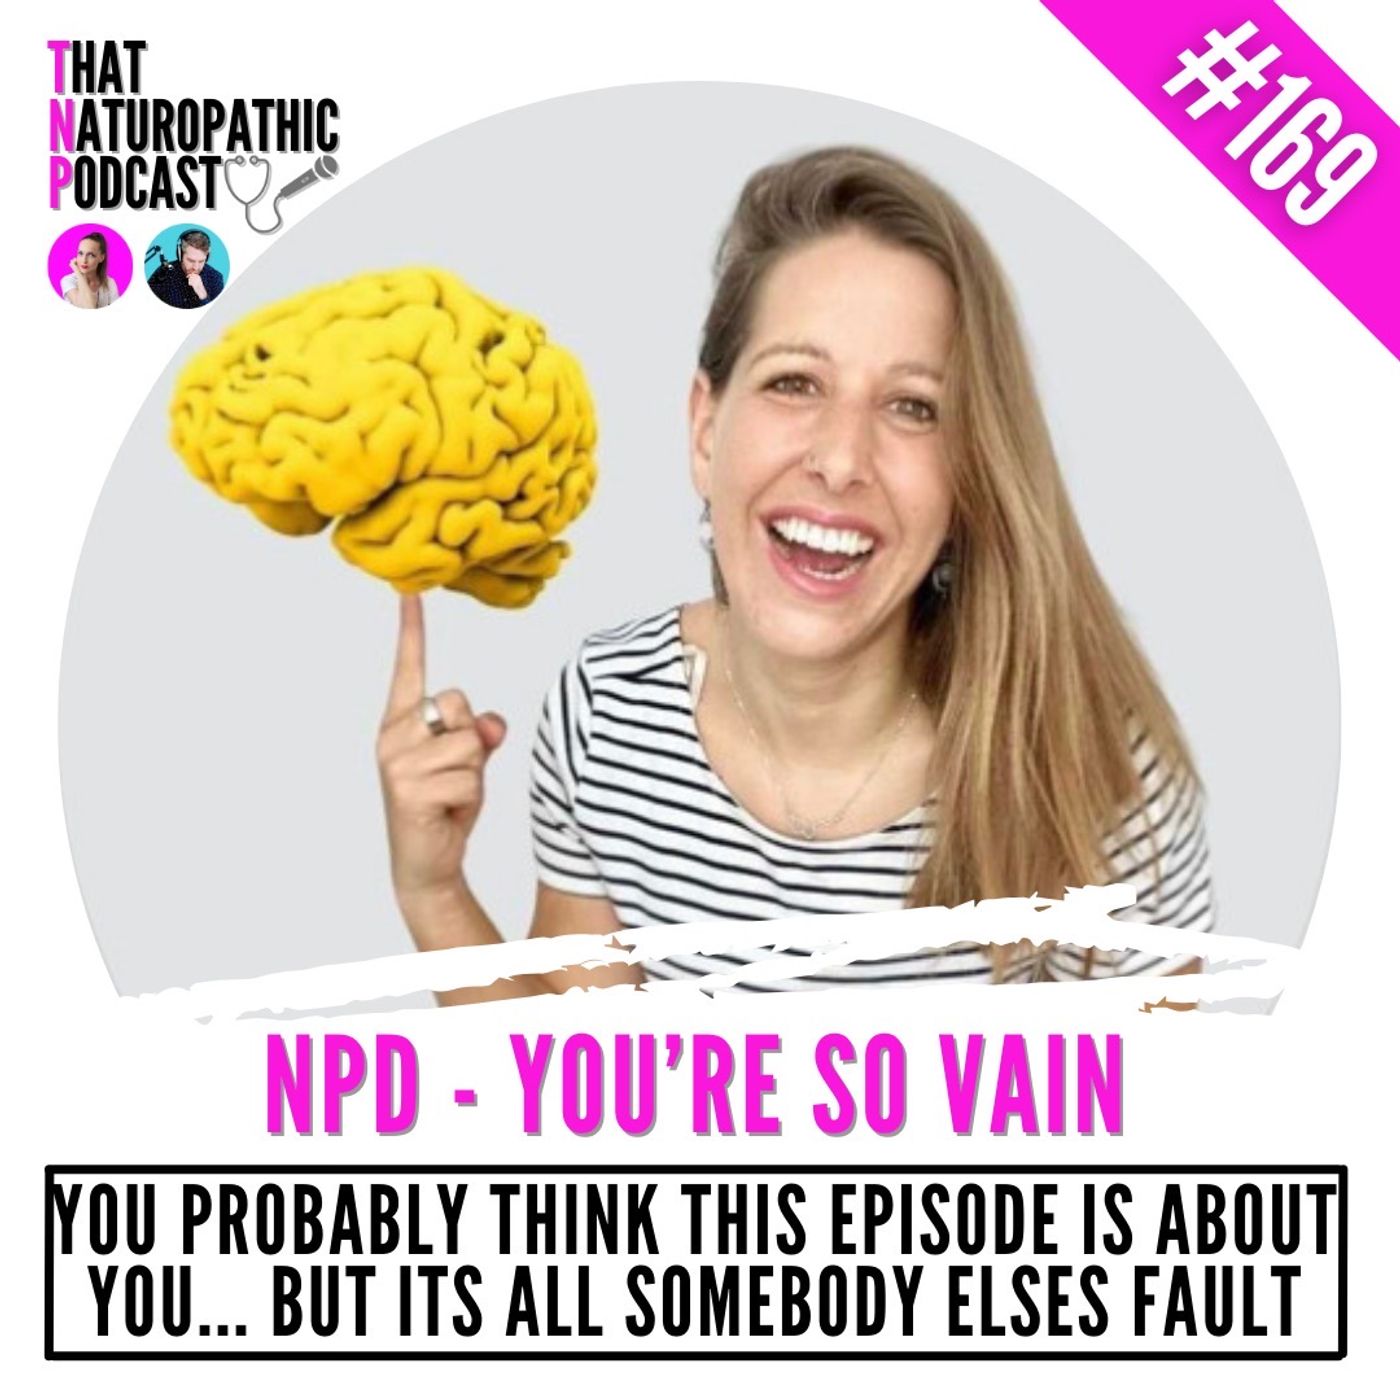 169: NPD - YOU'RE SO VAIN: YOU PROBABLY THINK THIS EPISODE IS ABOUT YOU .... But it's All Somebody Else's Fault